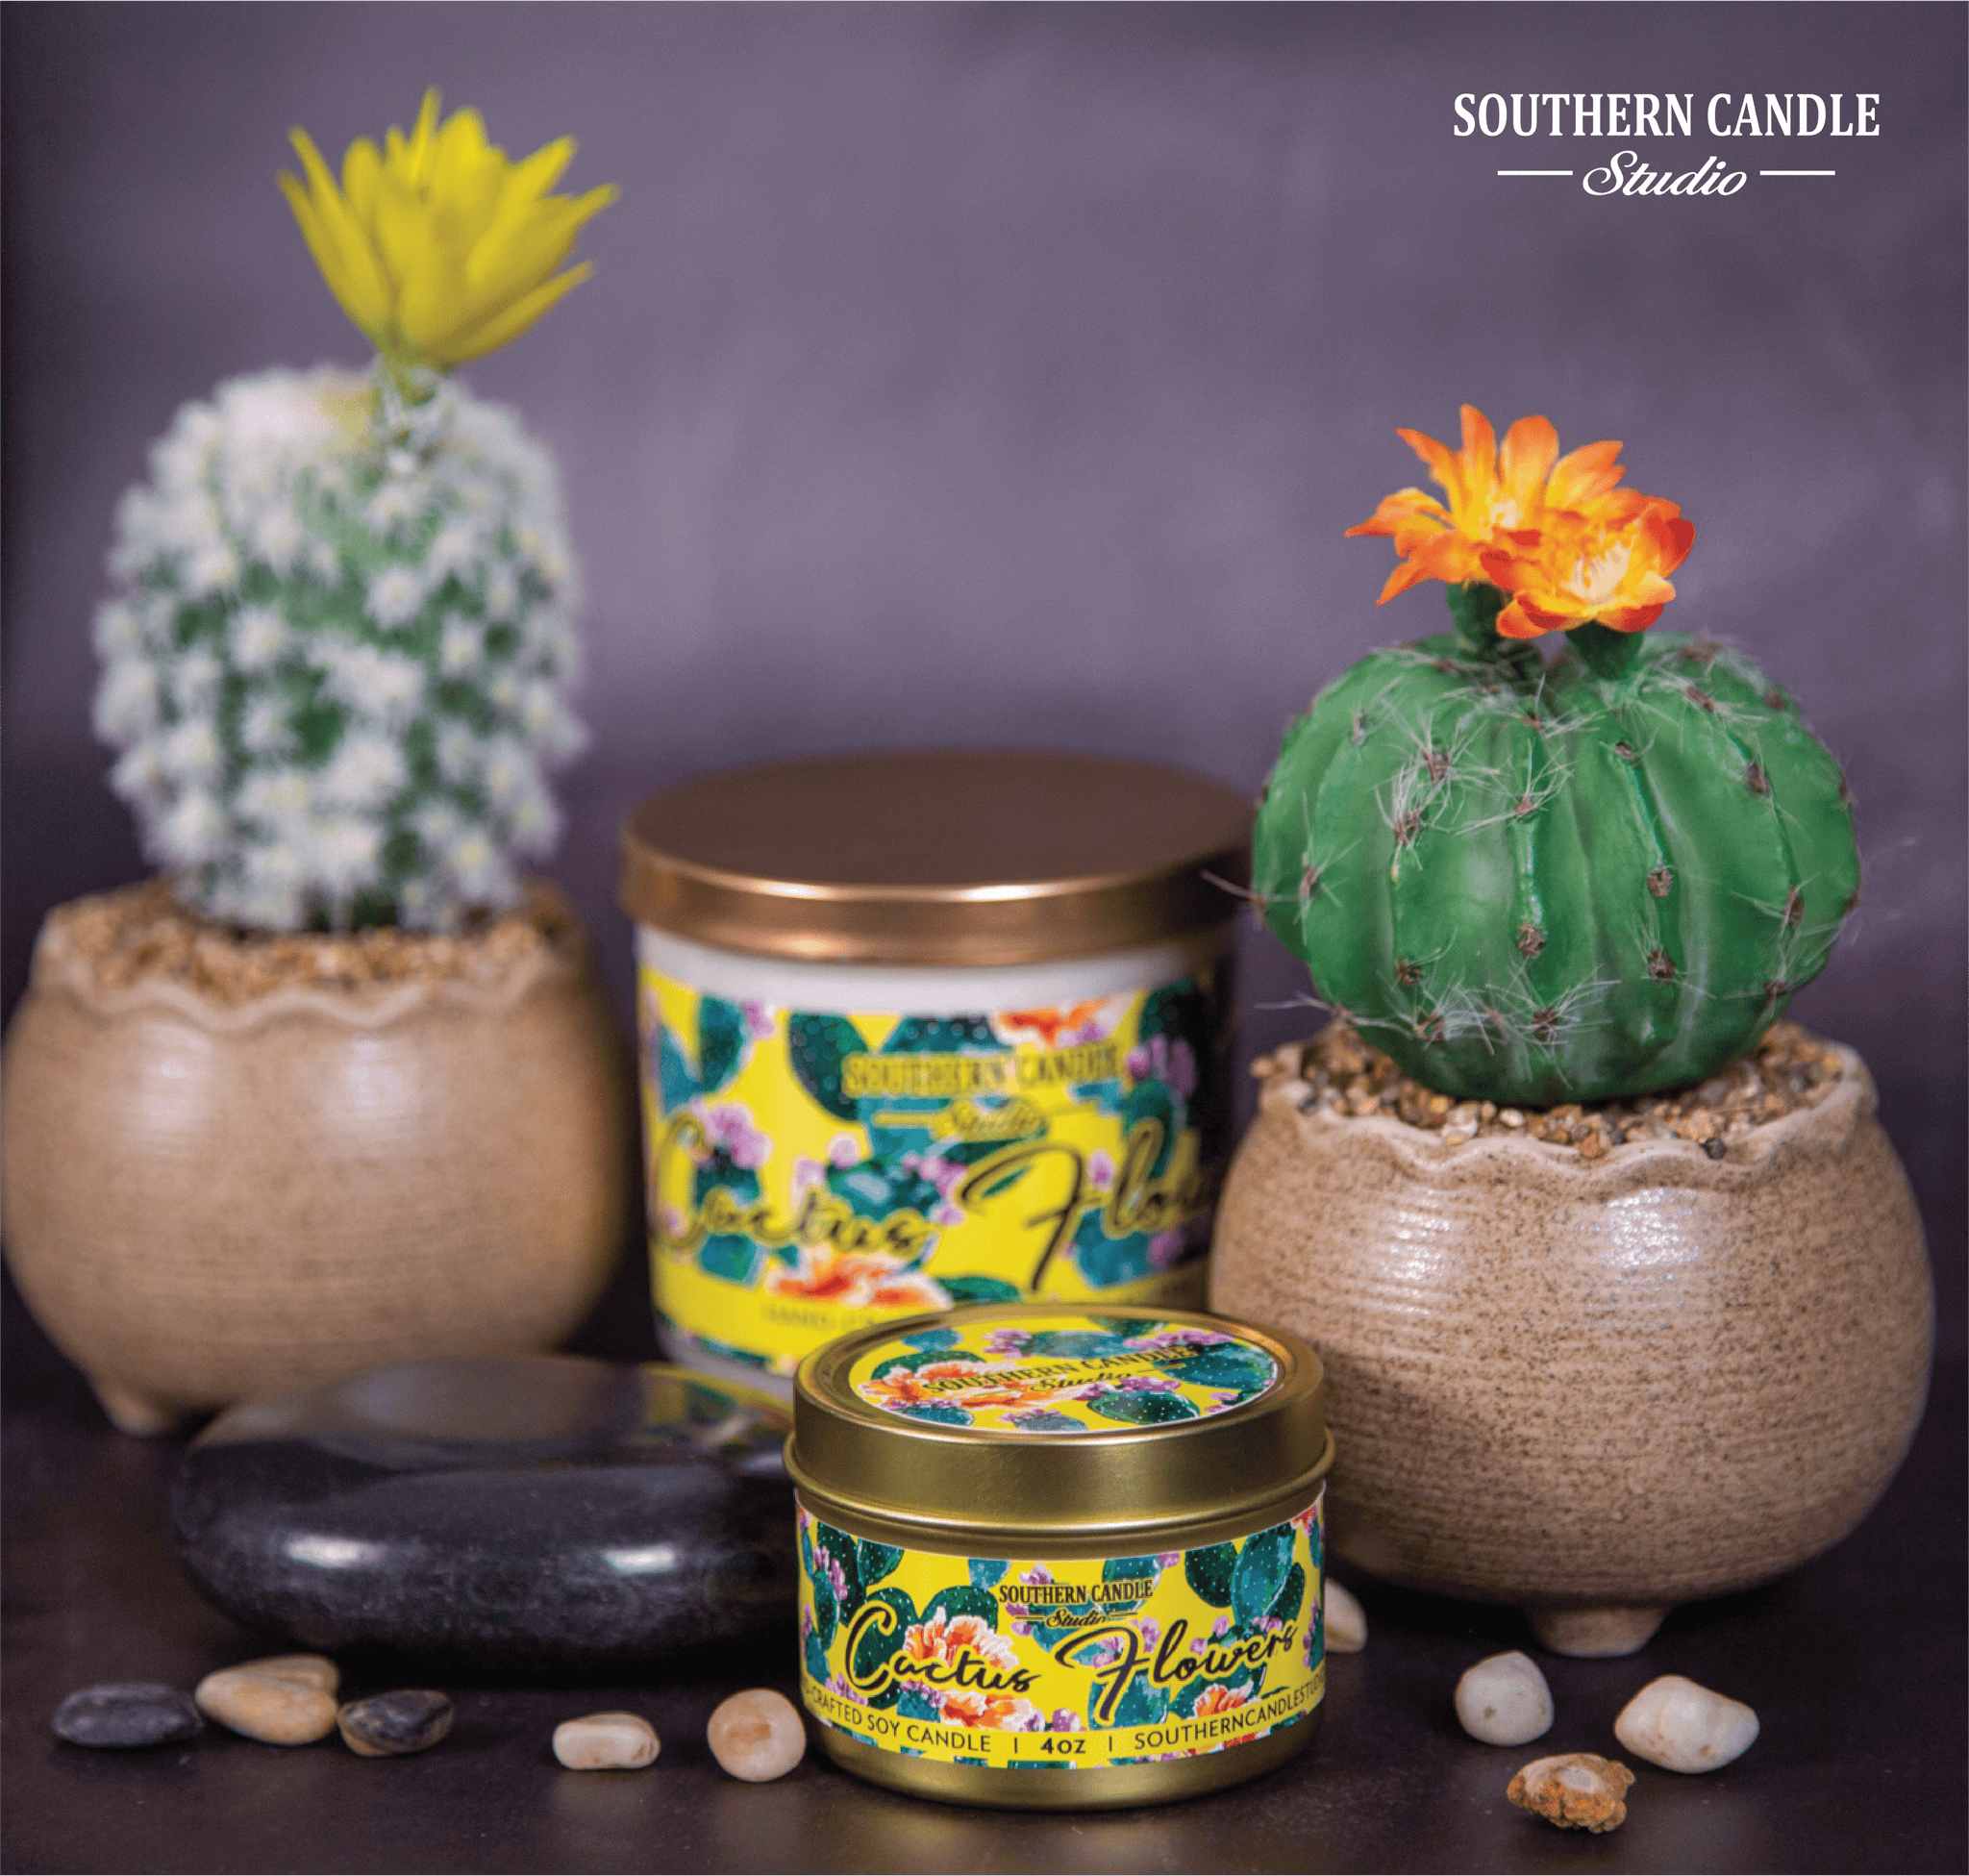 Cactus Flower and Jade Soy Candle Vegan Candle Natural Soy Wax